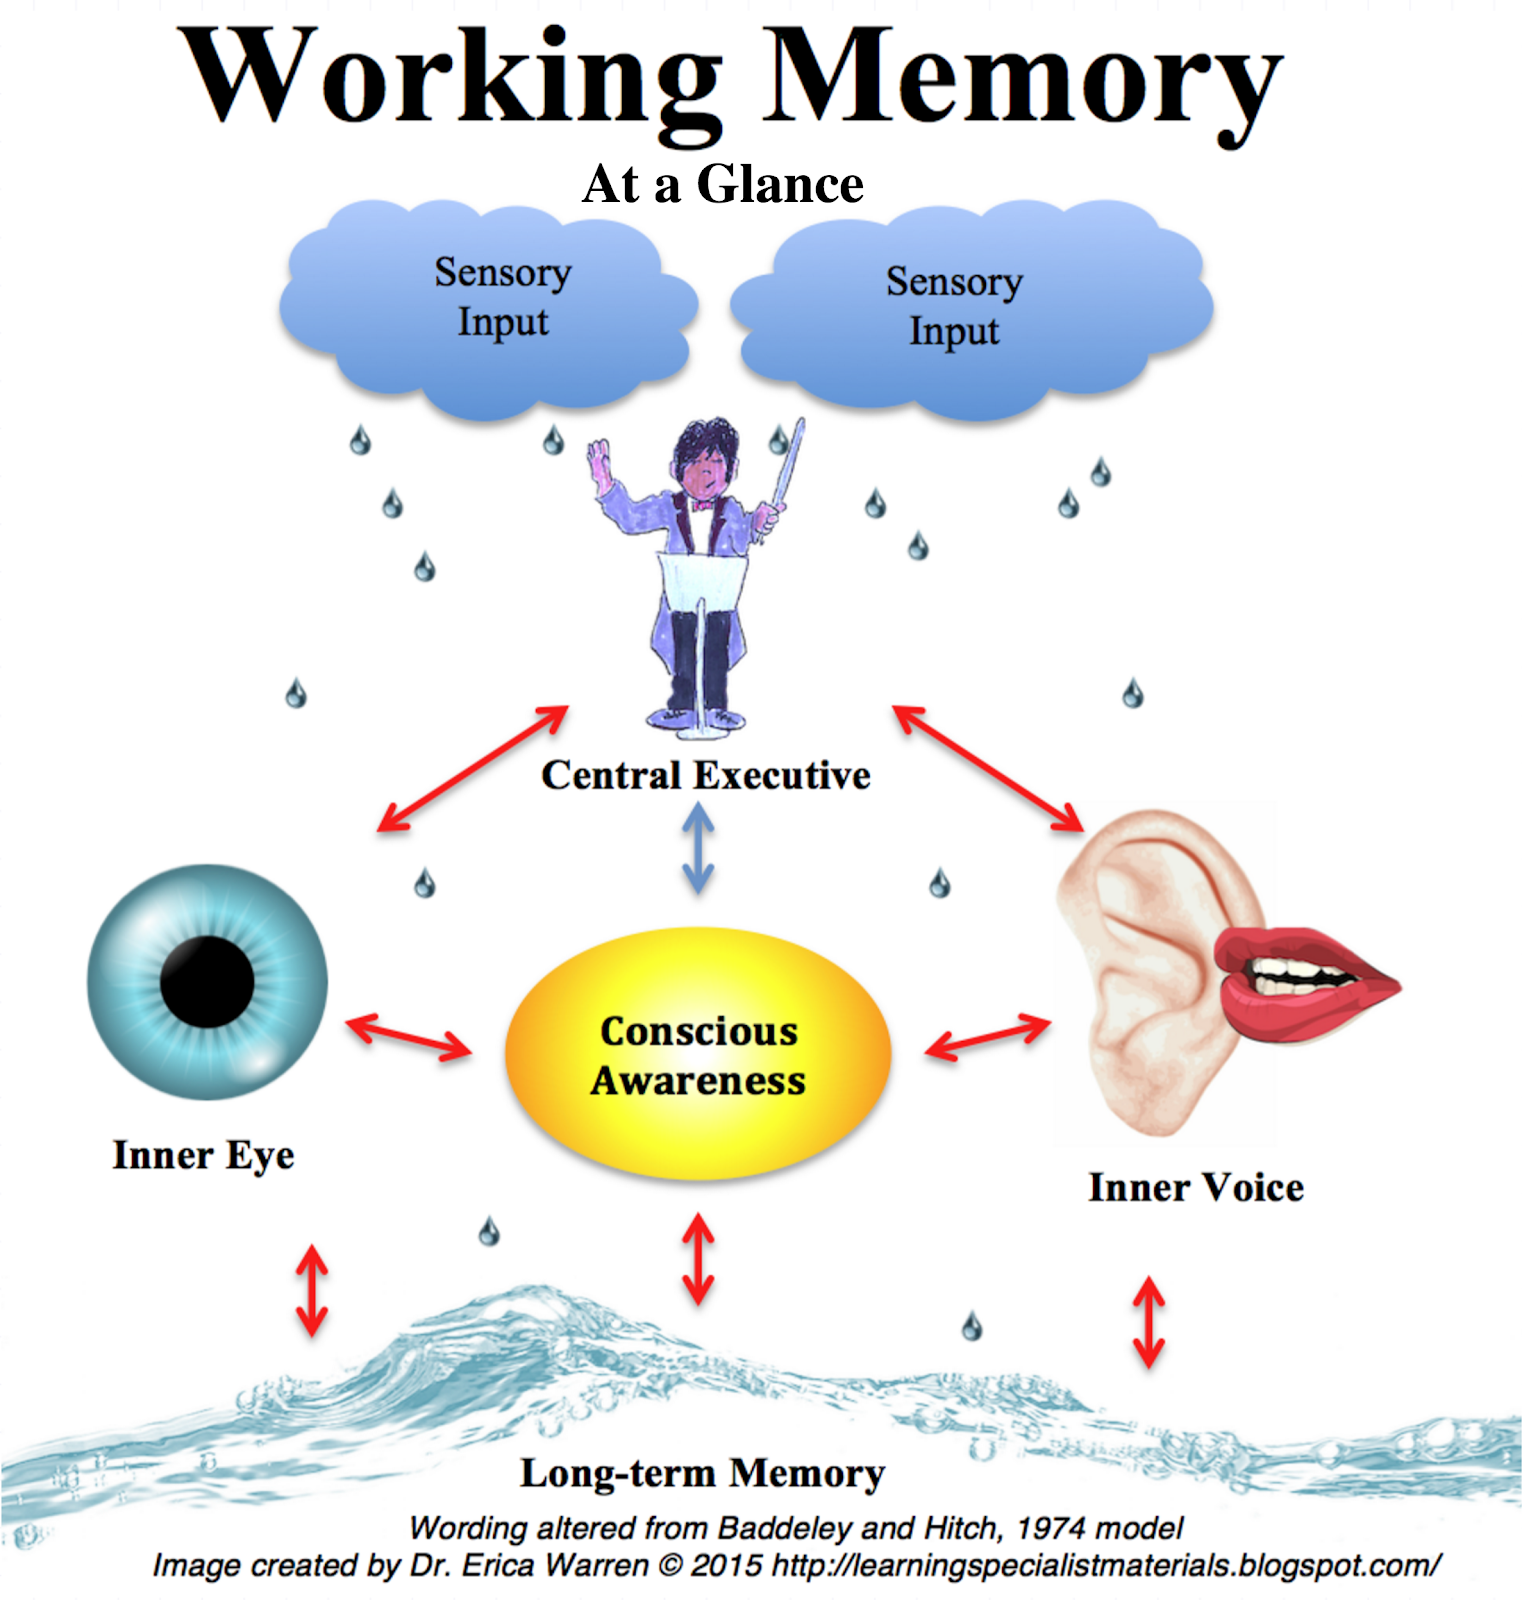 What is working memory?